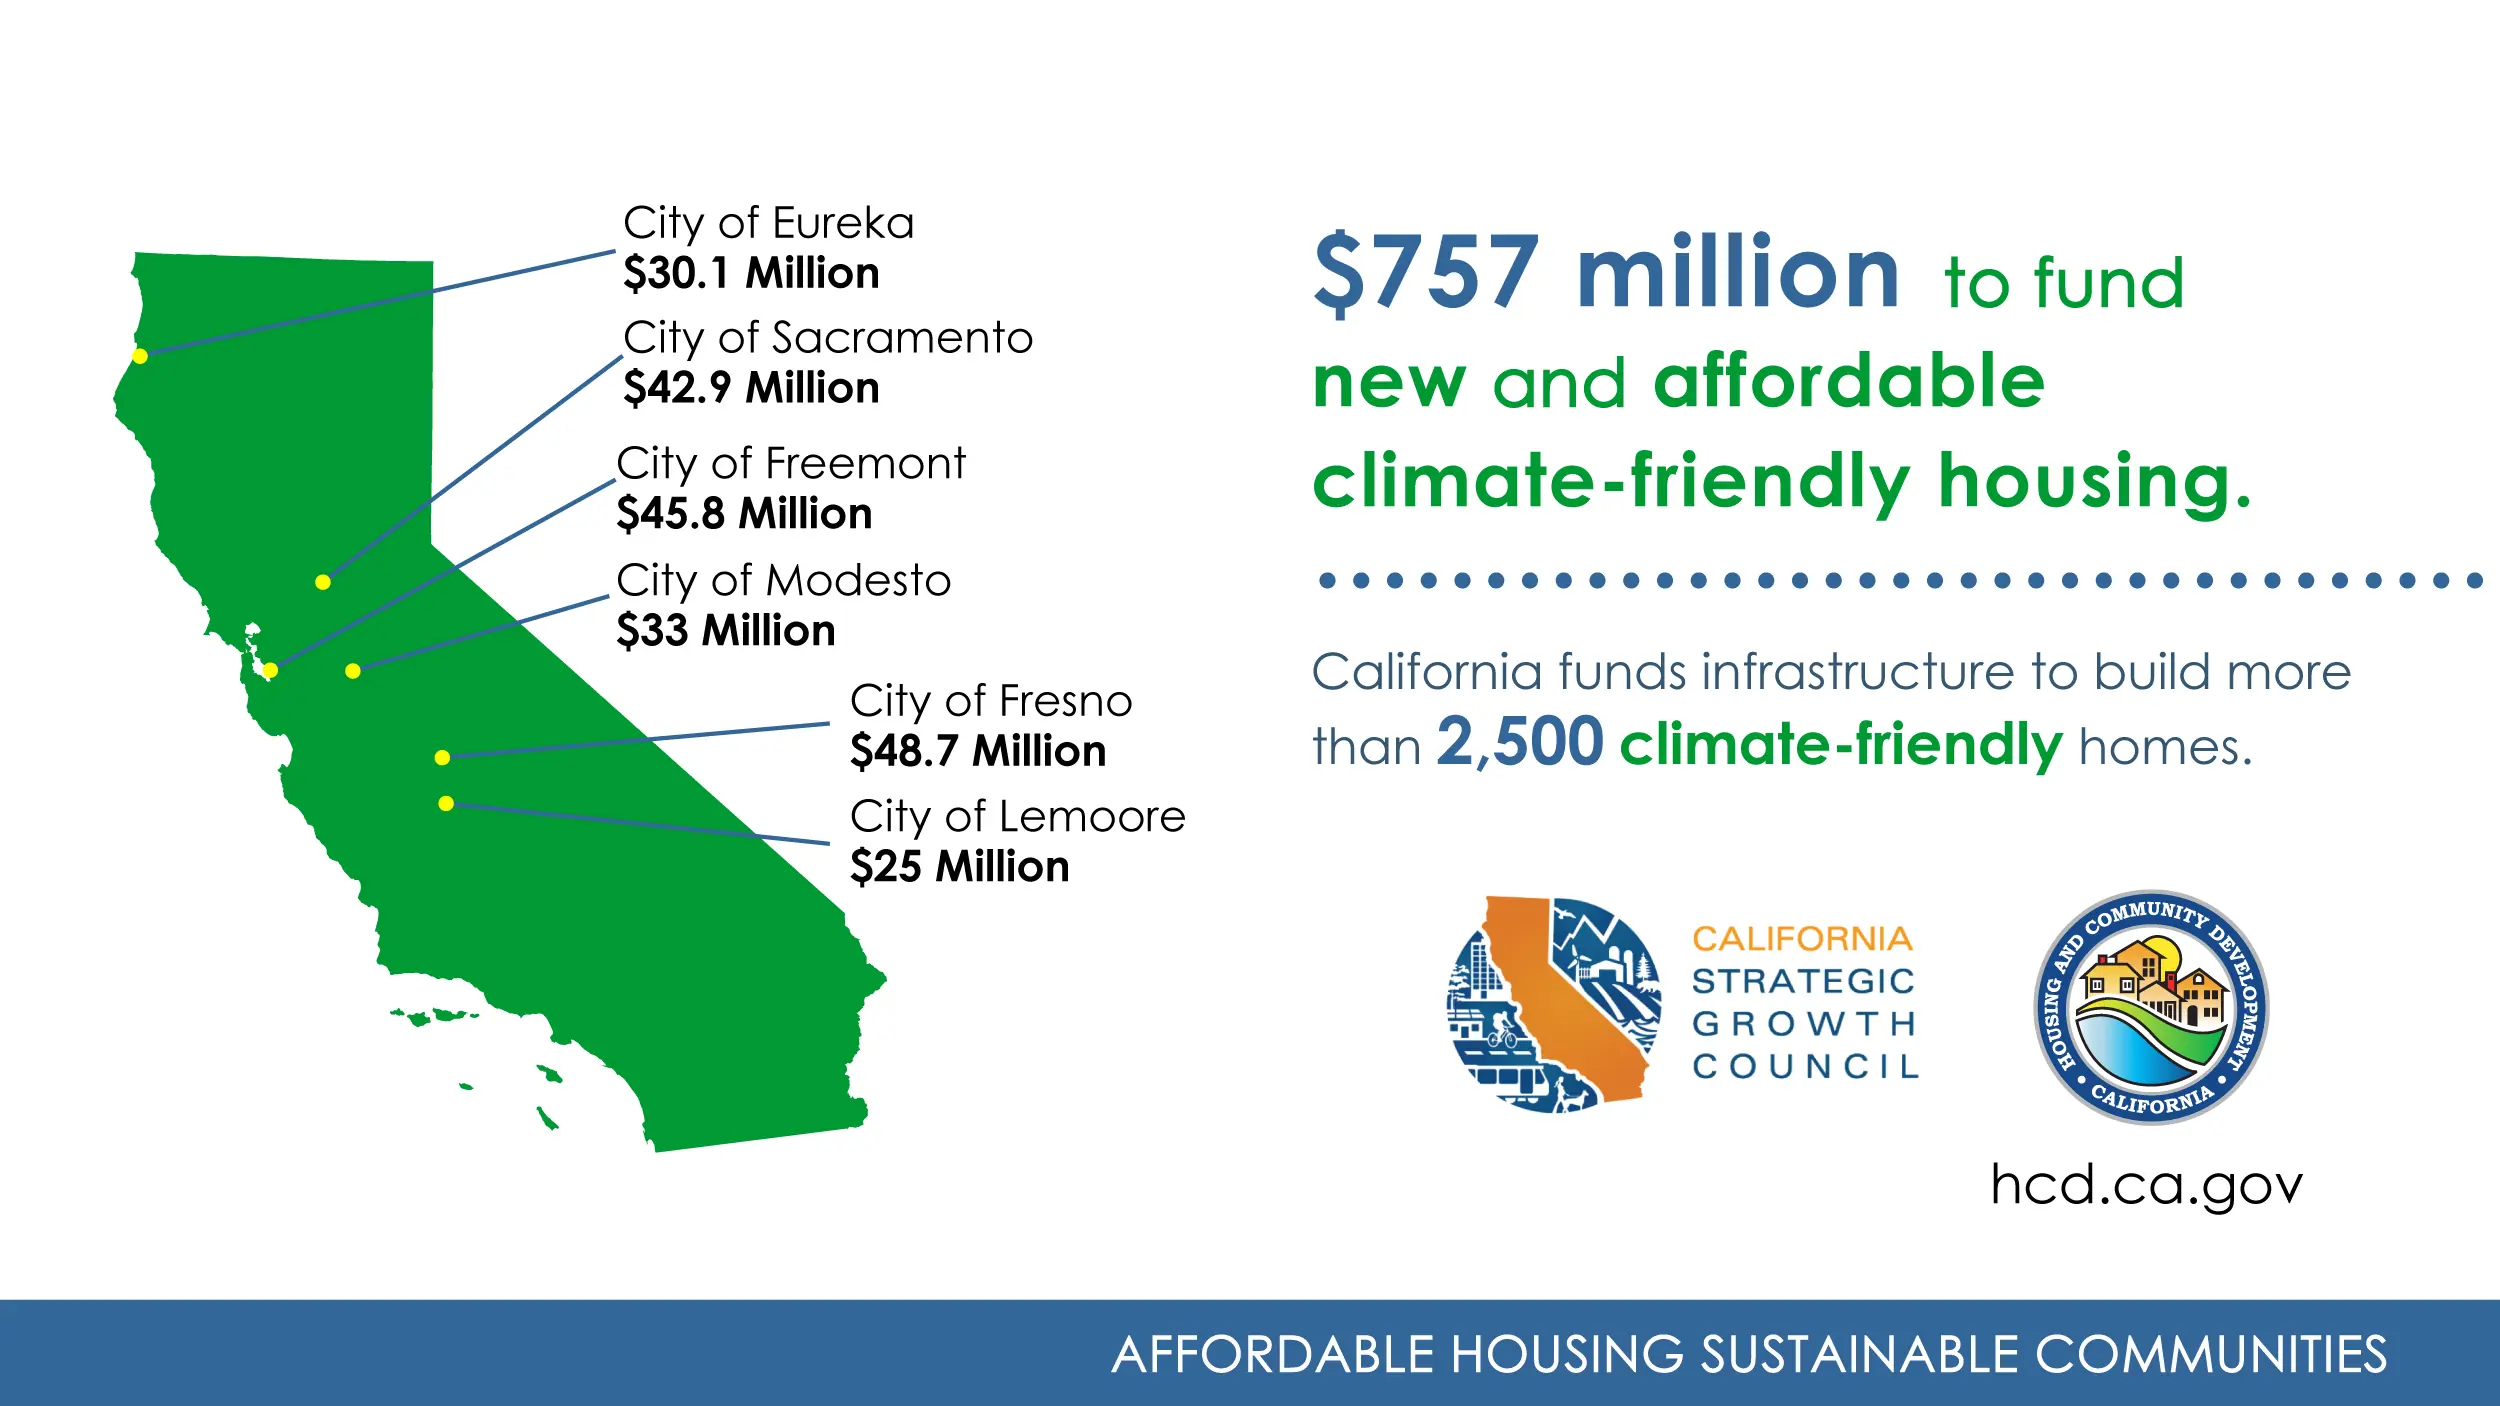 Map of California with awarded cities. Affordable Housing Sustainable Communities program. $757 million to fund new and affordable climate-friendly housing. California funds infrastructure to build more than 2,500 climate-friendly homes. Awarded cities are City of Eureka $30.1 million, City of Sacramento $42.9 million, City of Freemont $45.8 million, City of Modesto $33 million, City of Fresno $48.7 million, and City of Lemoore $25 million.